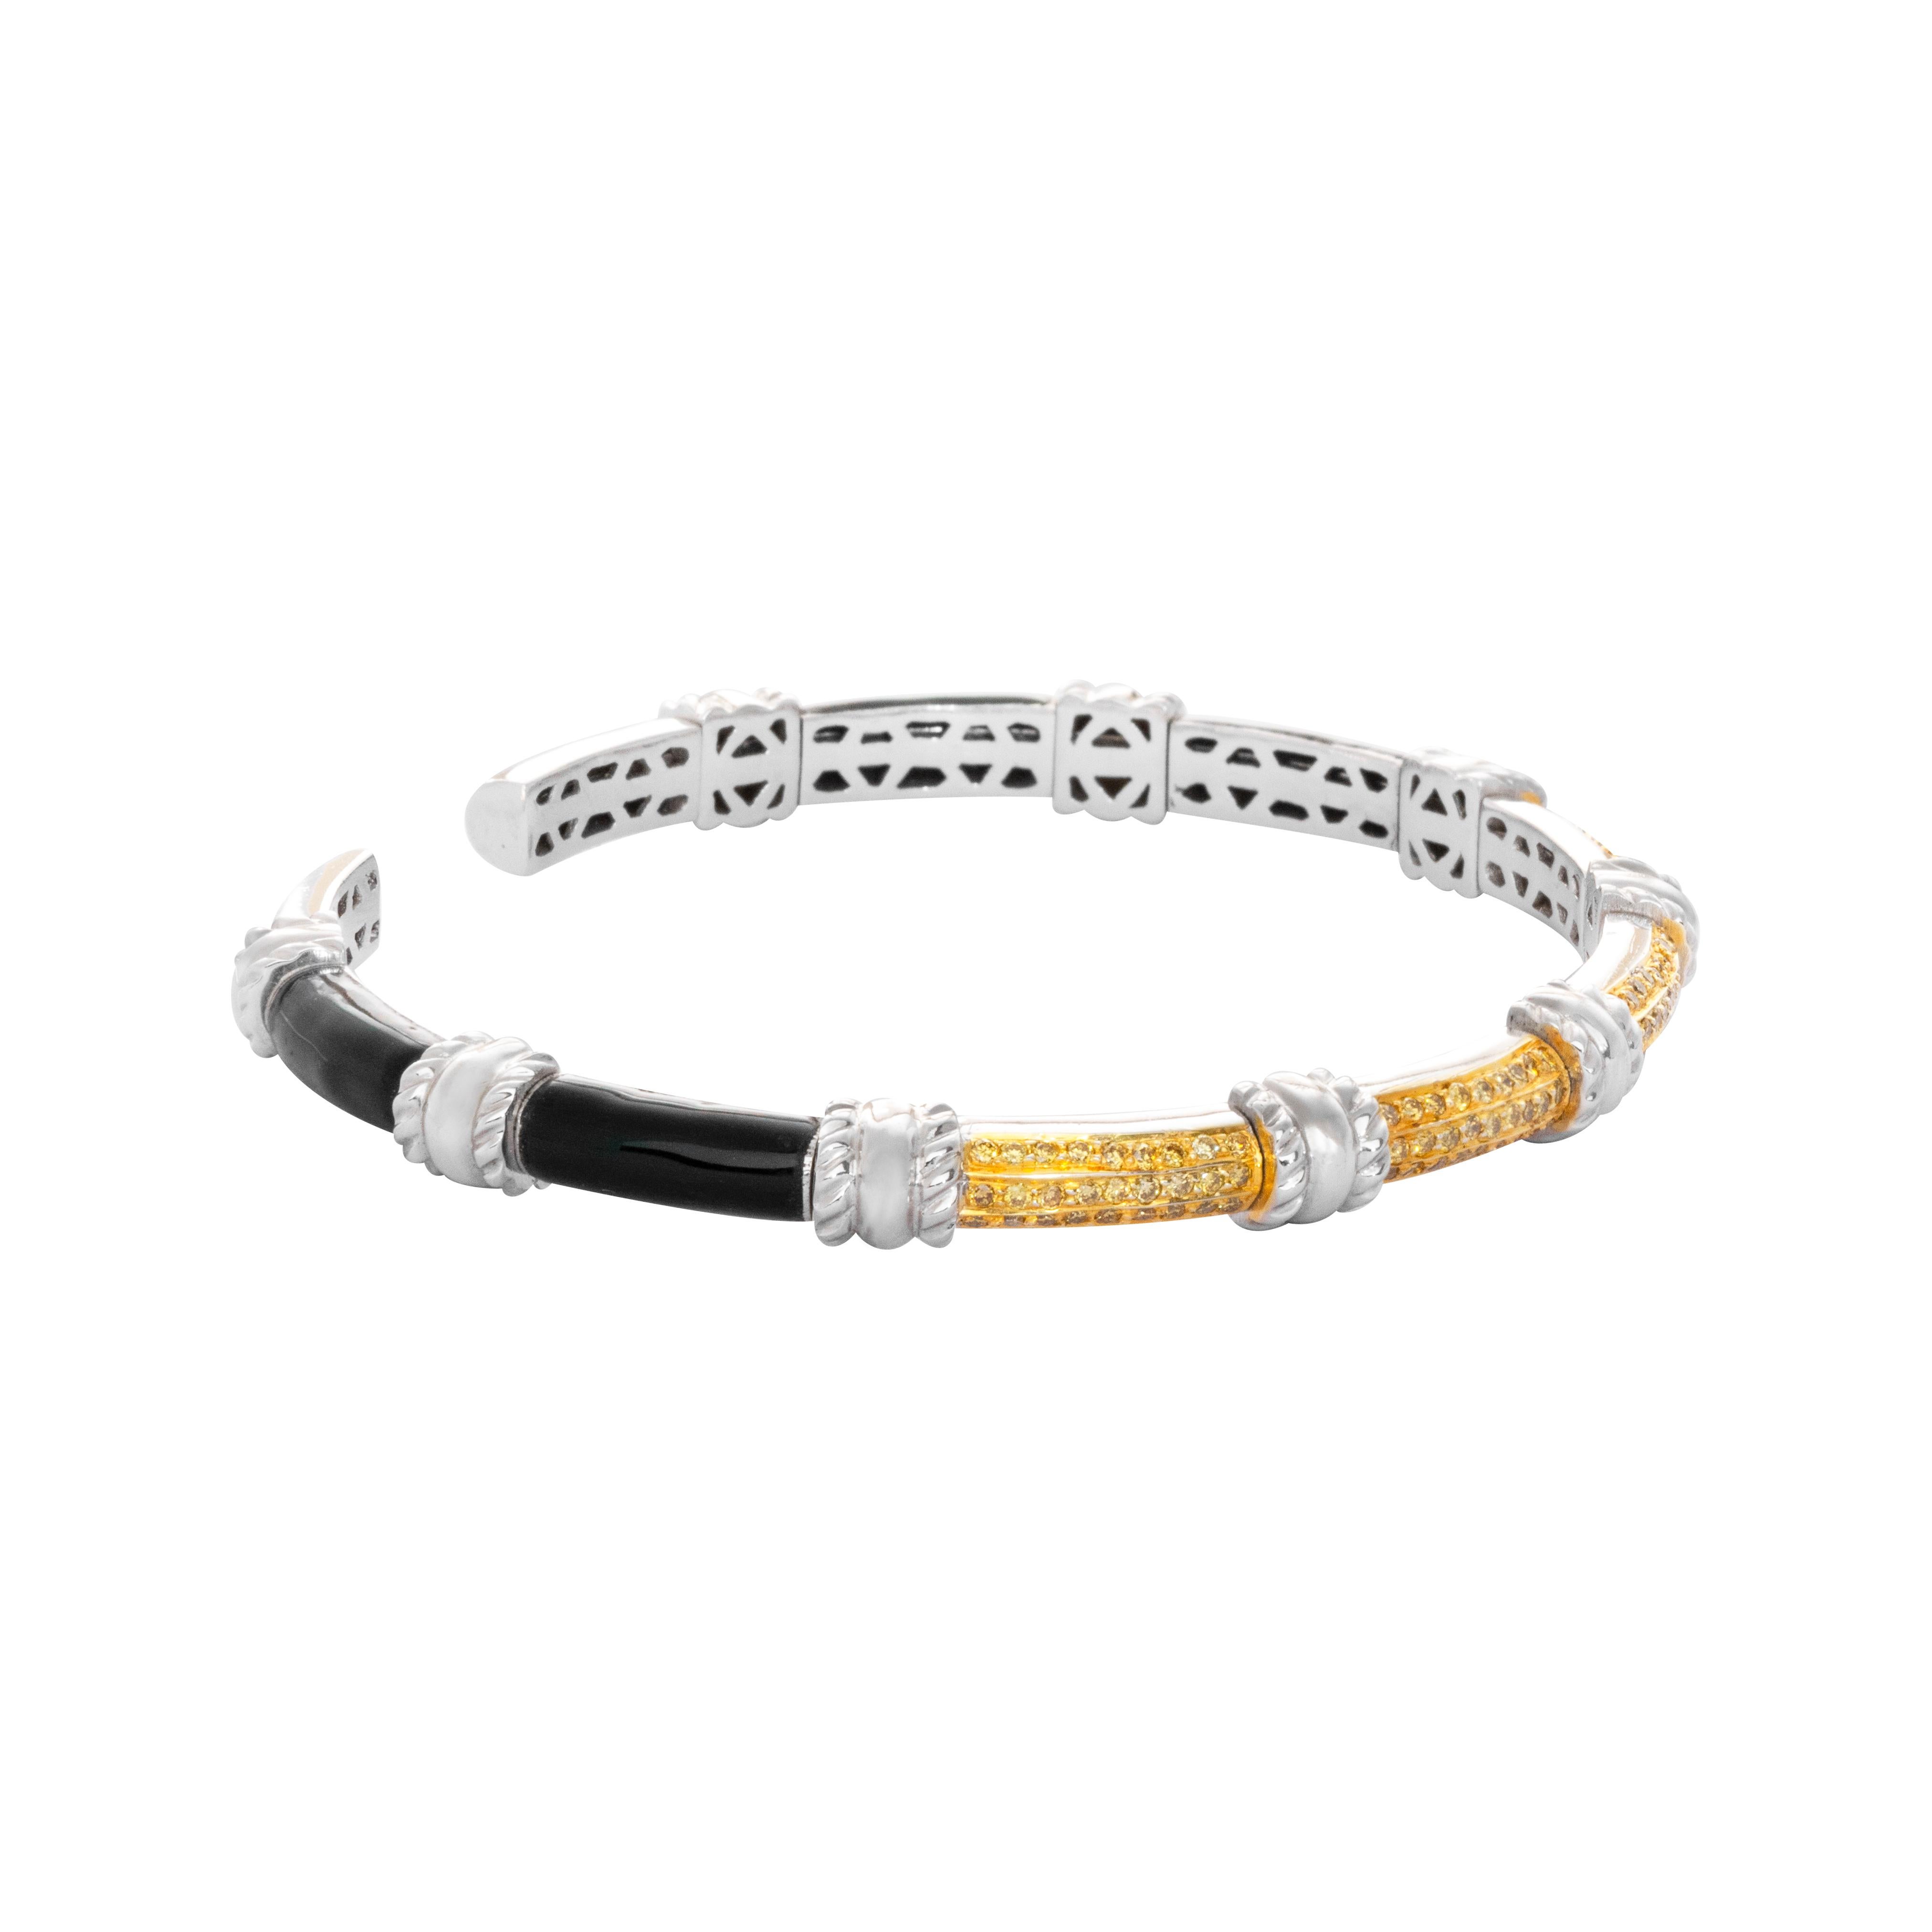 18 Karat White Gold Black Enamel Yellow Diamond Cuff Bracelet

This unique, light weight cuff bracelet set in 18 karat white gold studded with yellow diamonds and black enamel is perfect for a cocktail party or for evening wear.

Diamonds -